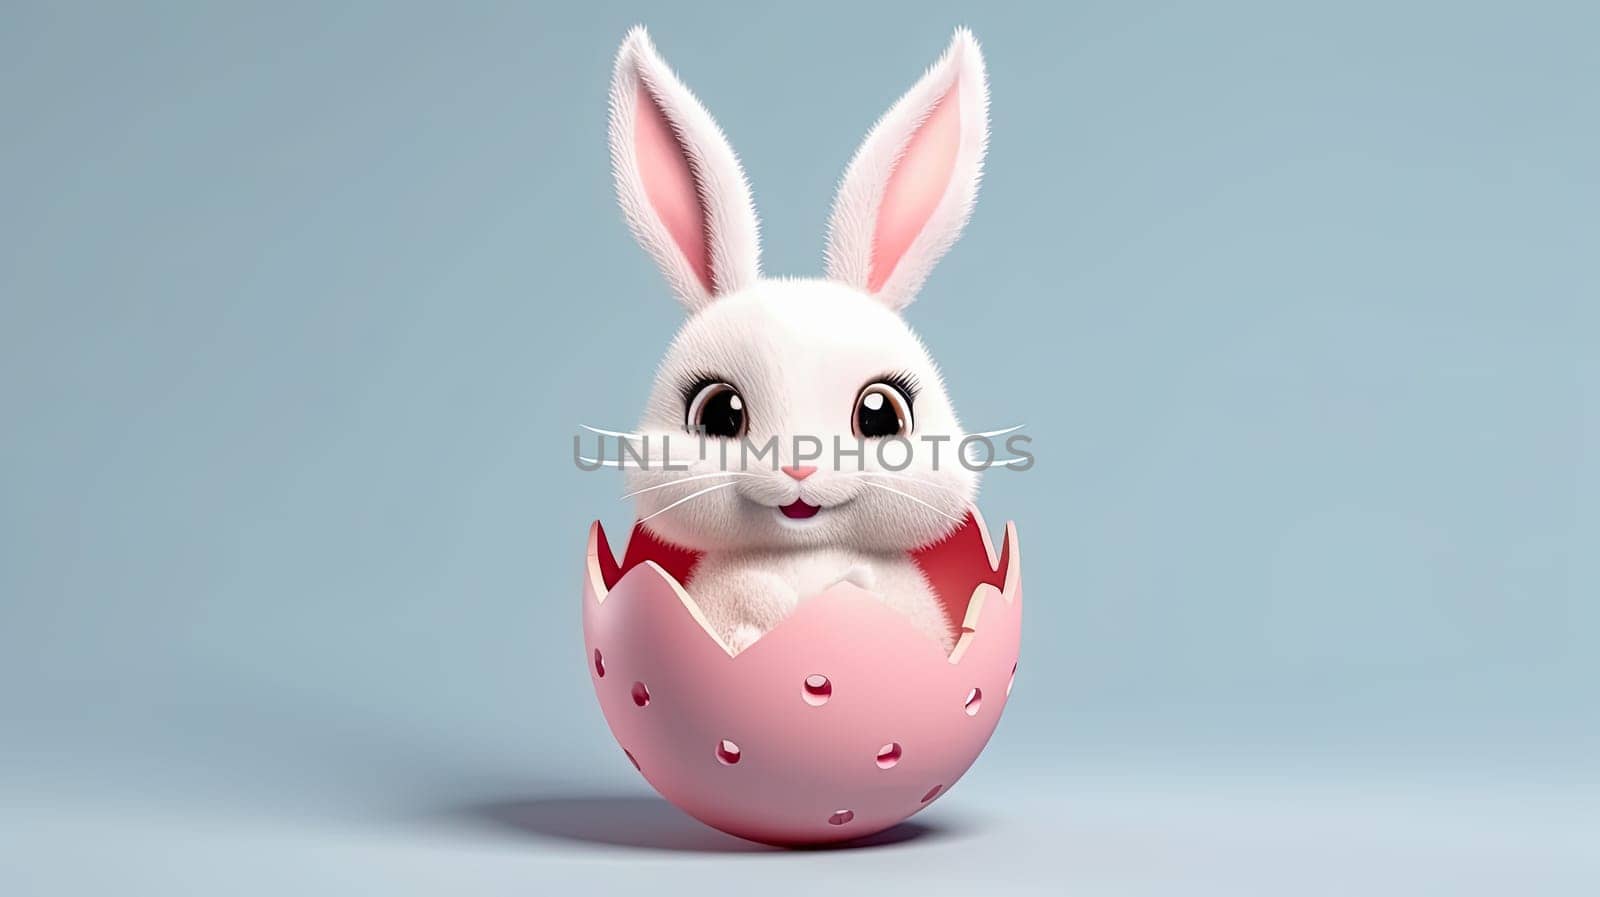 A colorful holiday, the Easter Bunny sits in a broken egg, a joyful illustration that captures the essence of the festive spirit of Easter and the vibrant energy of spring.